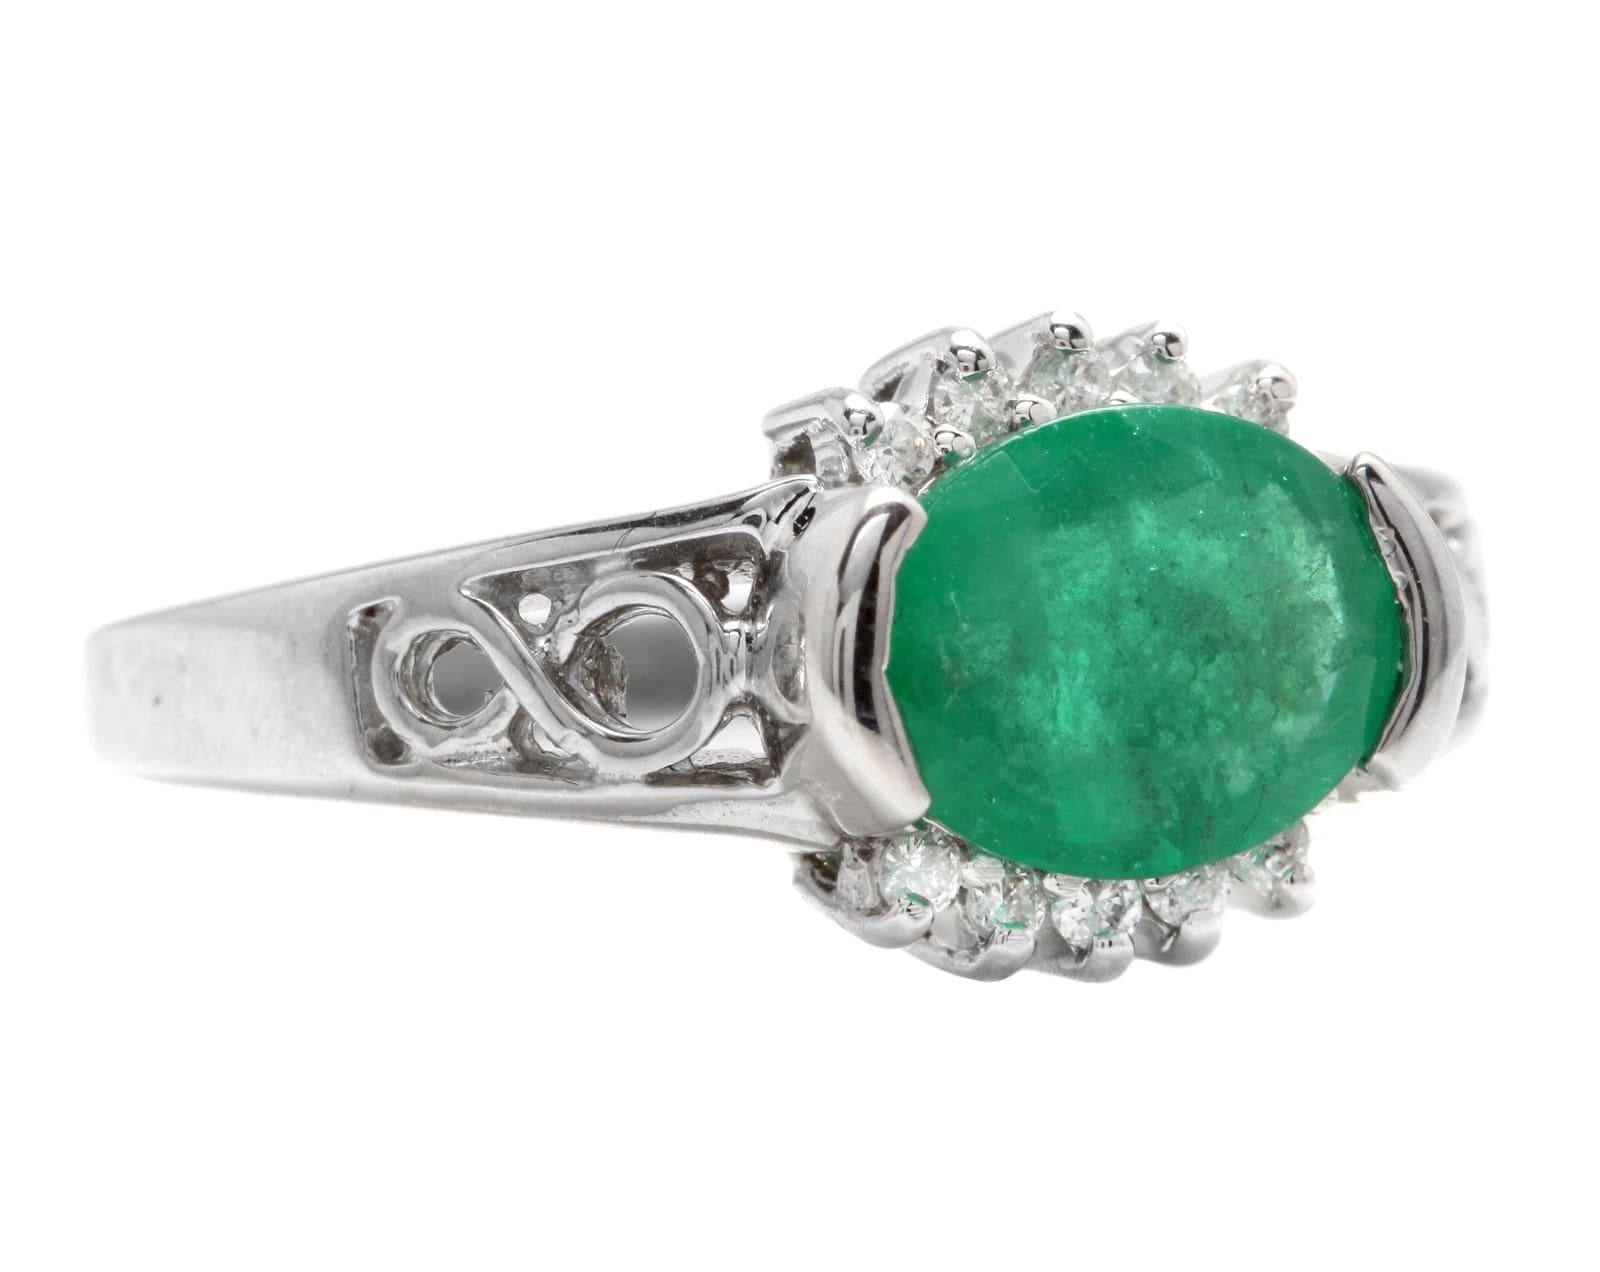 2.00 Carats Natural Emerald and Diamond 14K Solid White Gold Ring

Suggested Replacement Value: Approx. $5,000.00

Total Natural Green Emerald Weight is: Approx. 1.80 Carats

Emerald Measures: Approx. 9 x 7mm

Natural Round Diamonds Weight: Approx.